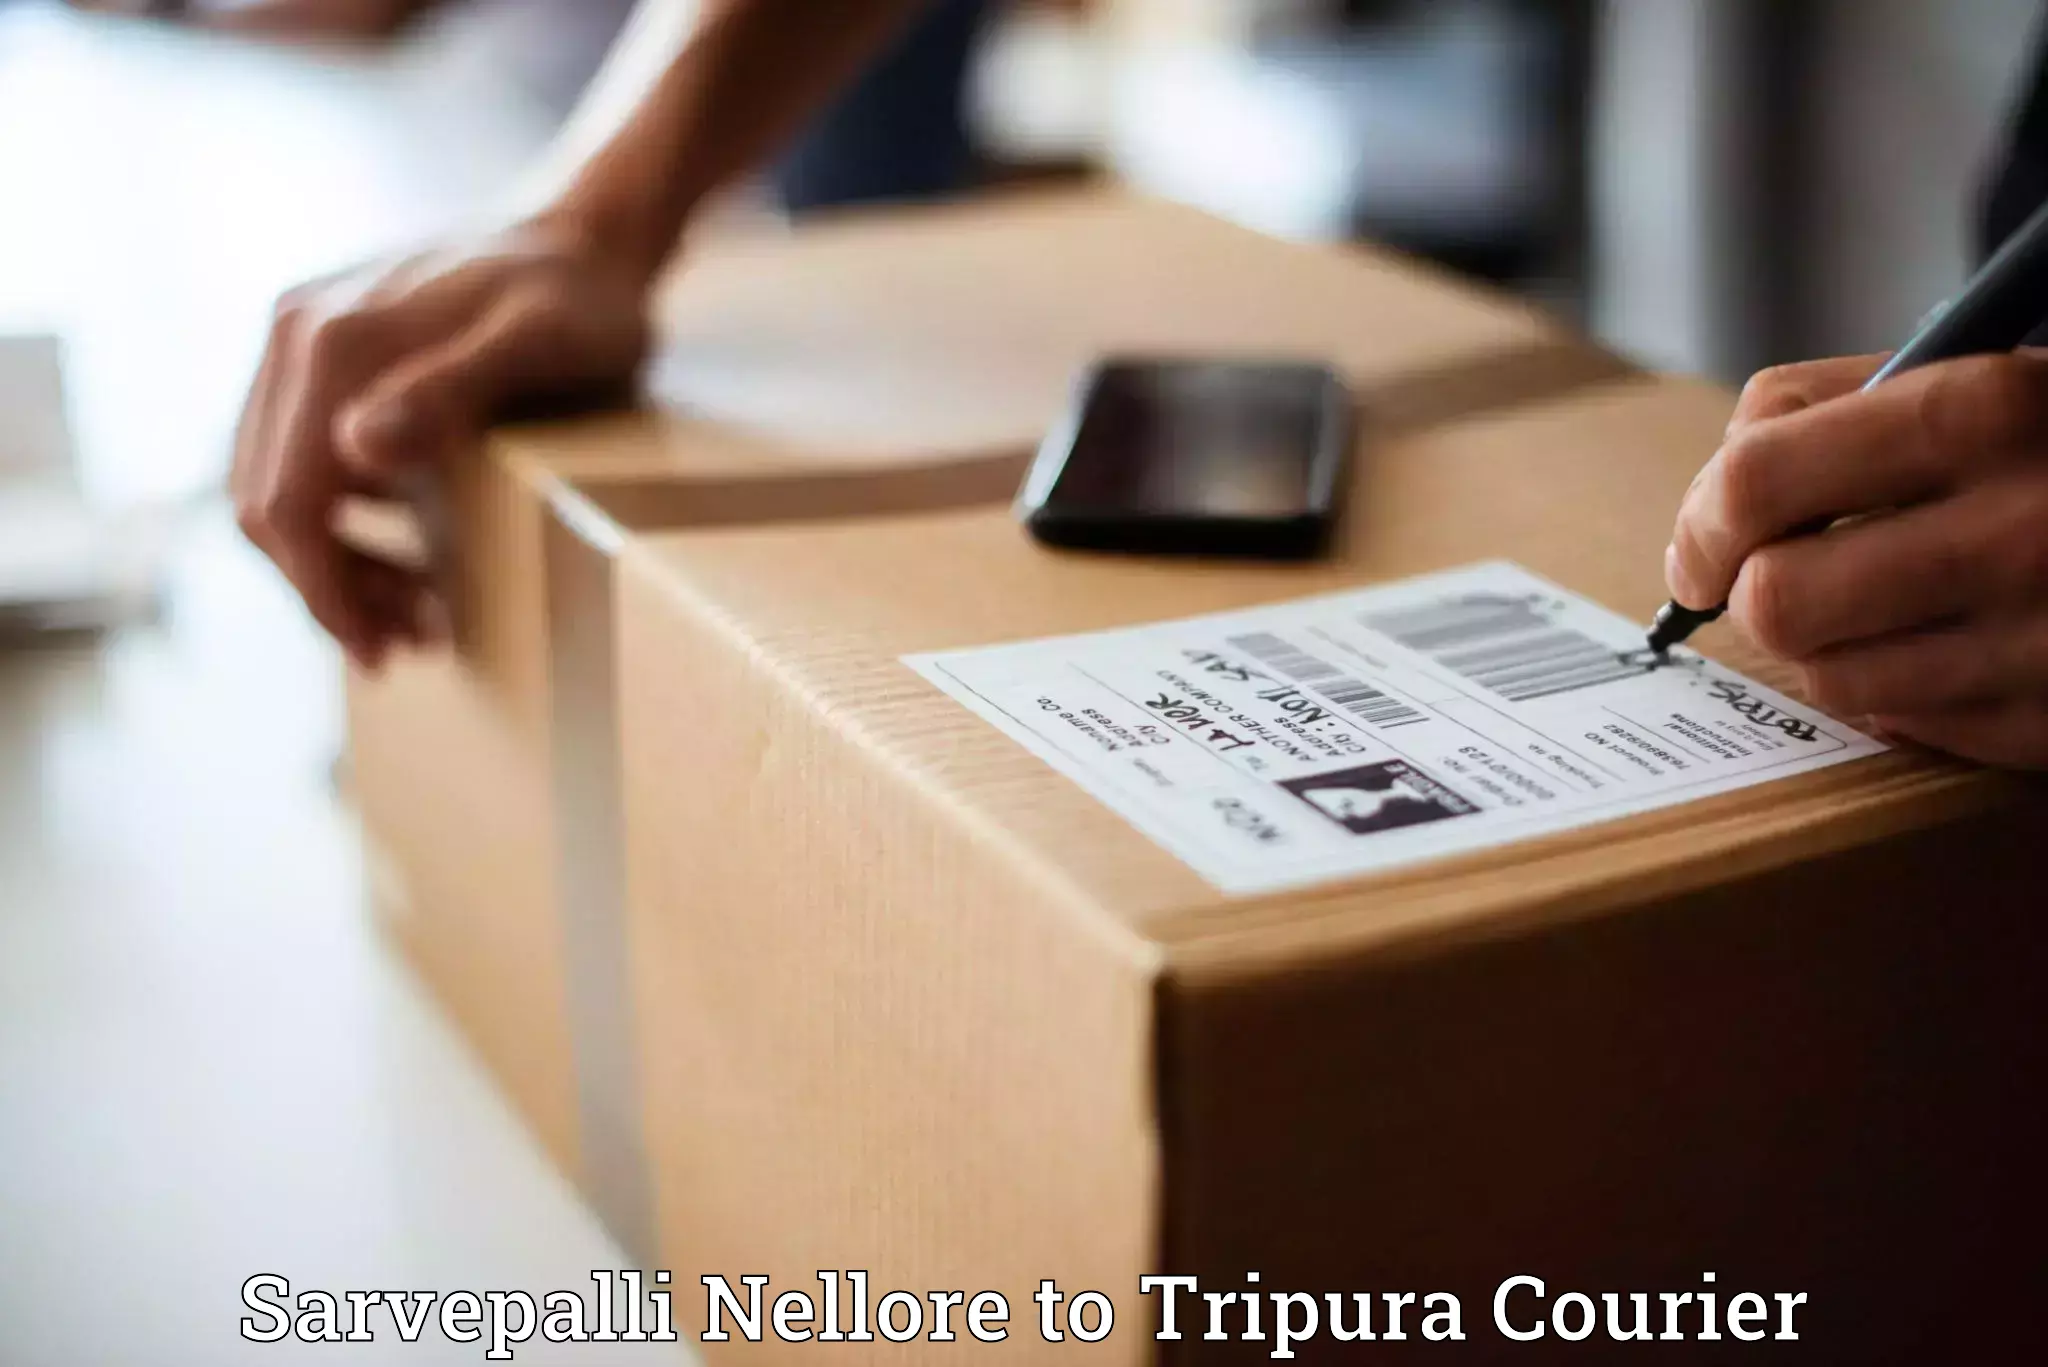 Package delivery network Sarvepalli Nellore to South Tripura